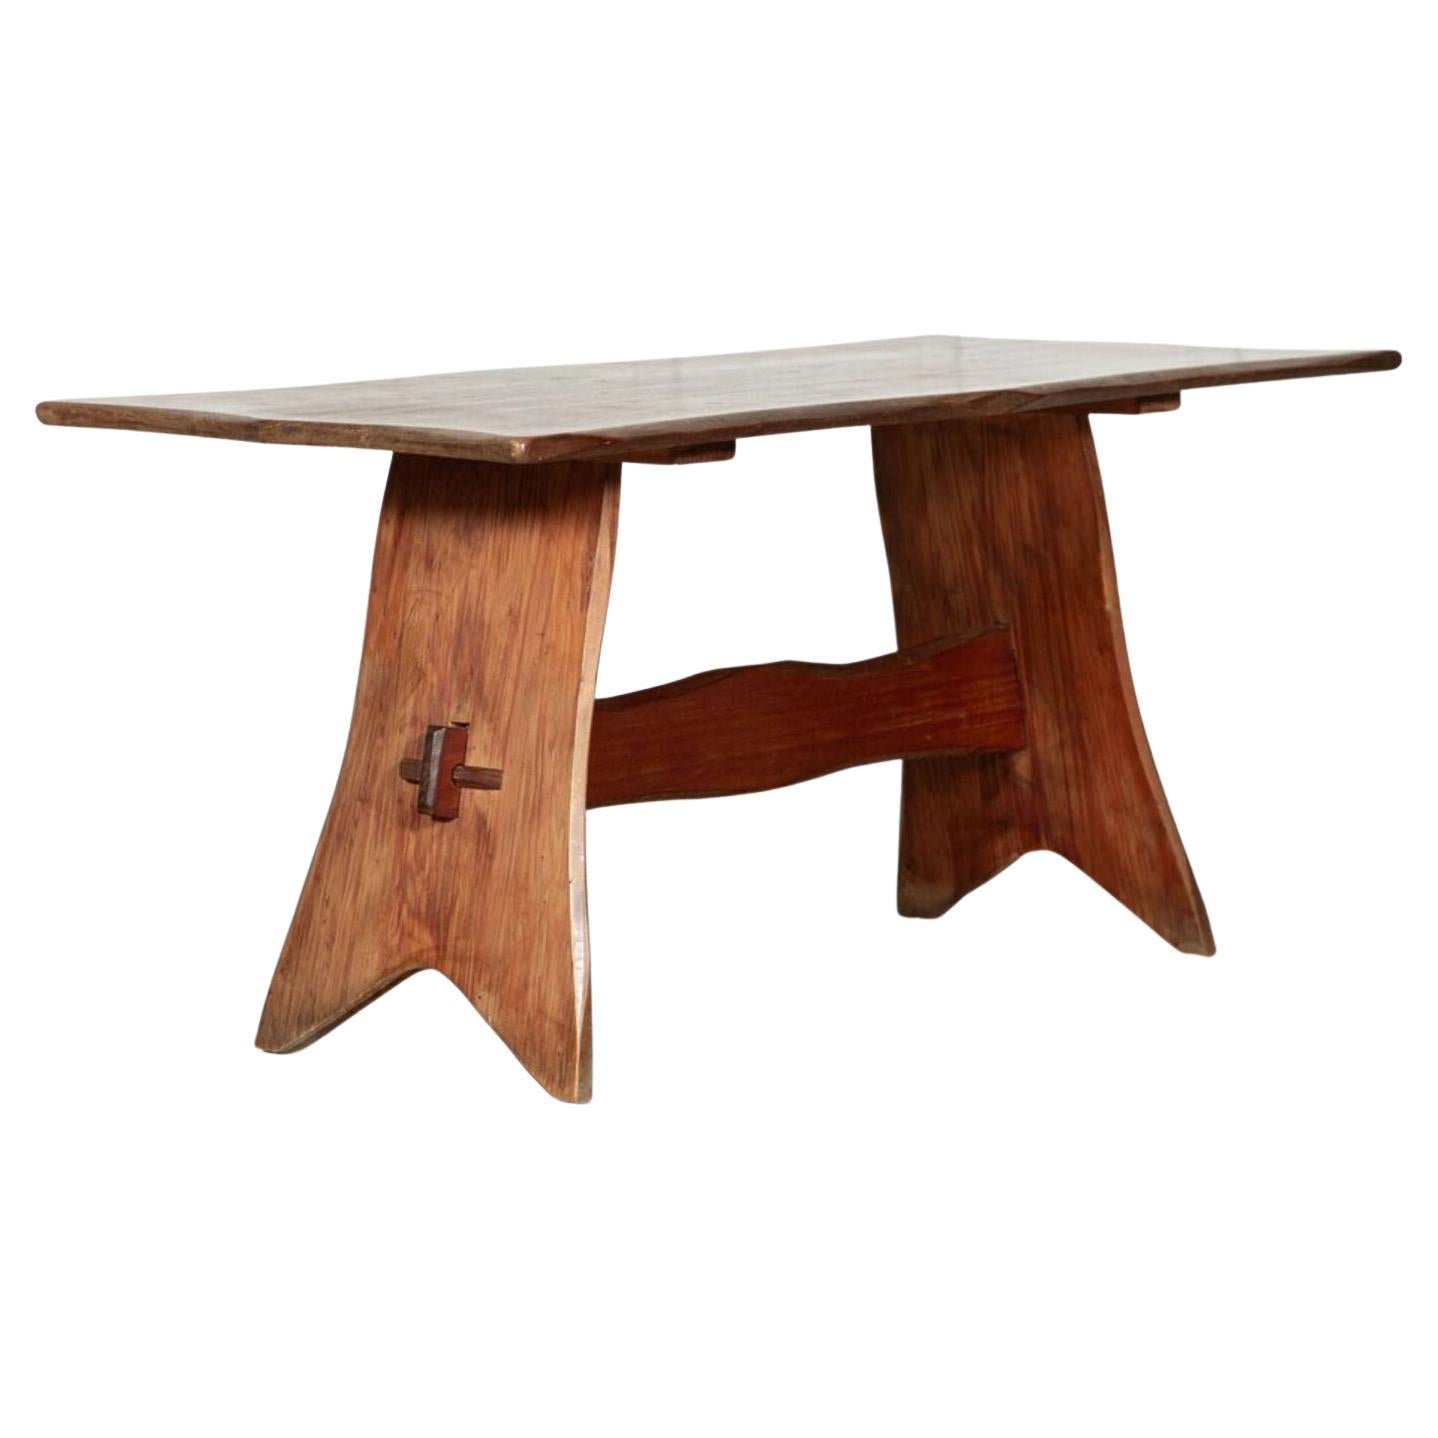 MidC English Carved Fruitwood Refectory Table / Desk For Sale